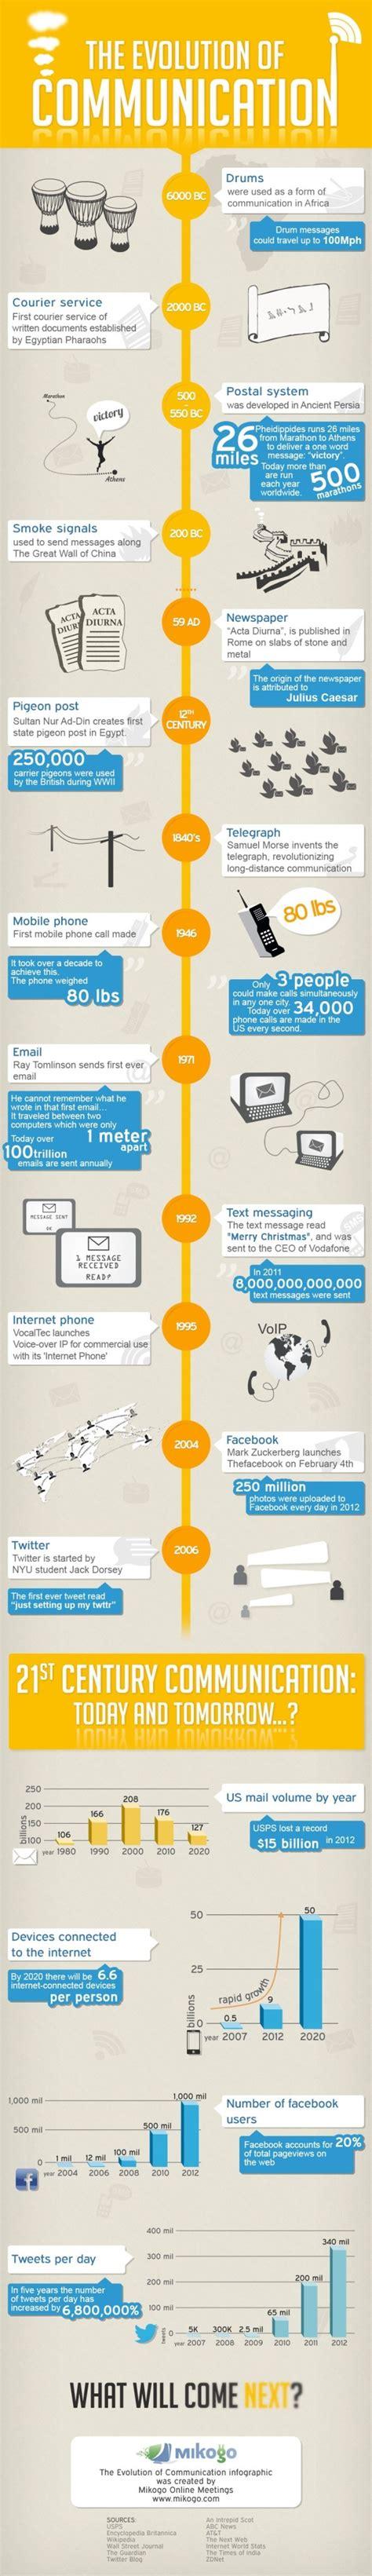 The Evolution of Digital Communication: Connecting the World